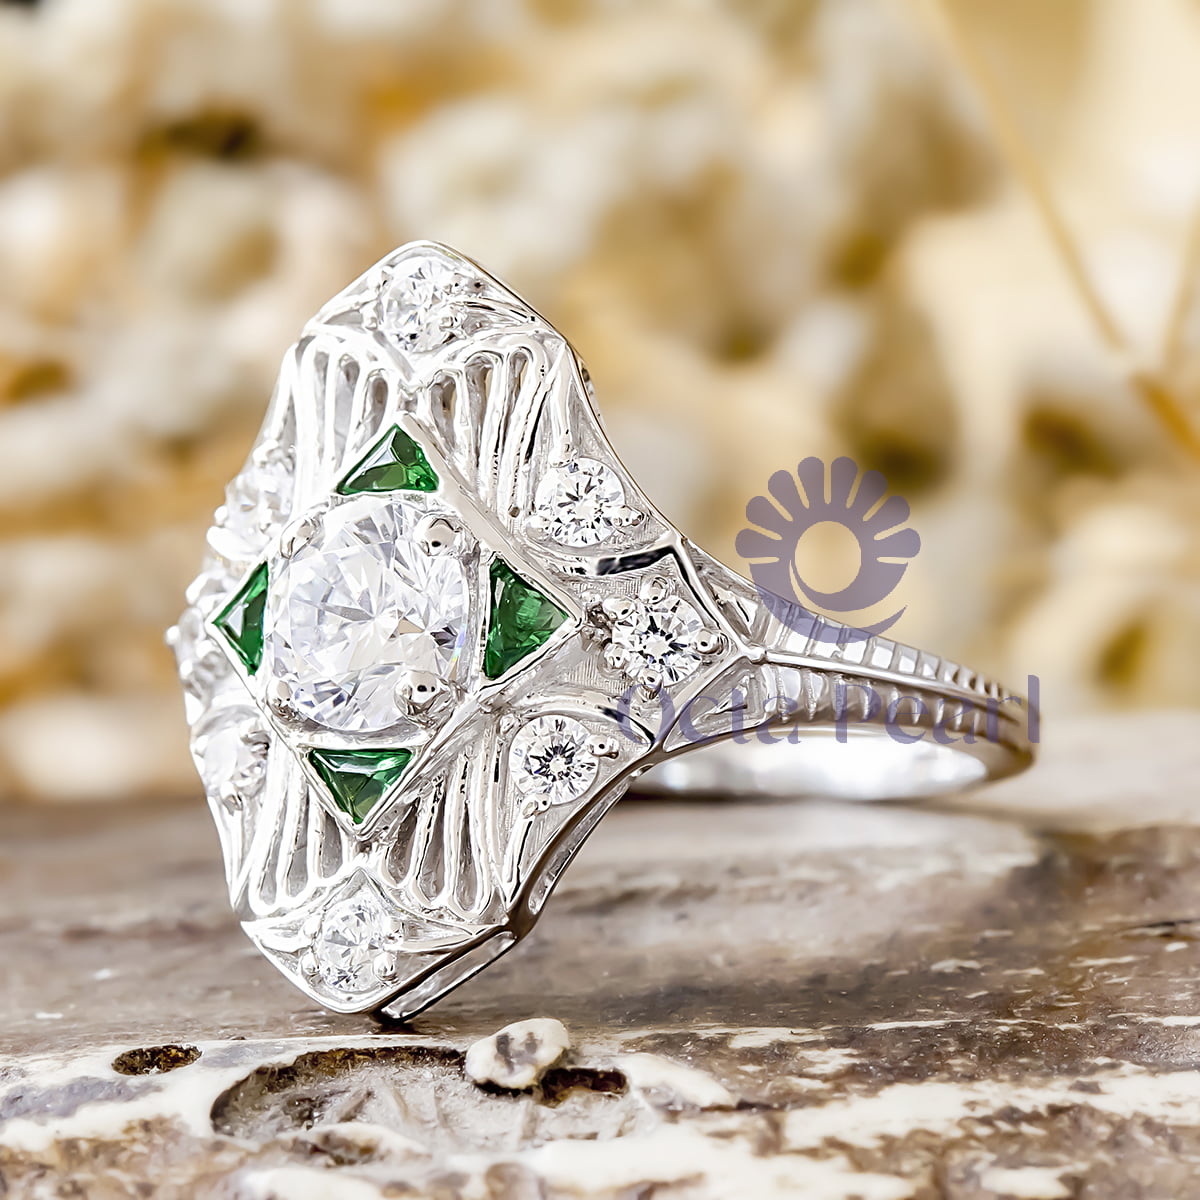 Round & Green Triangle Cut CZ Stone Openwork Vintage Navette Engagement Ring